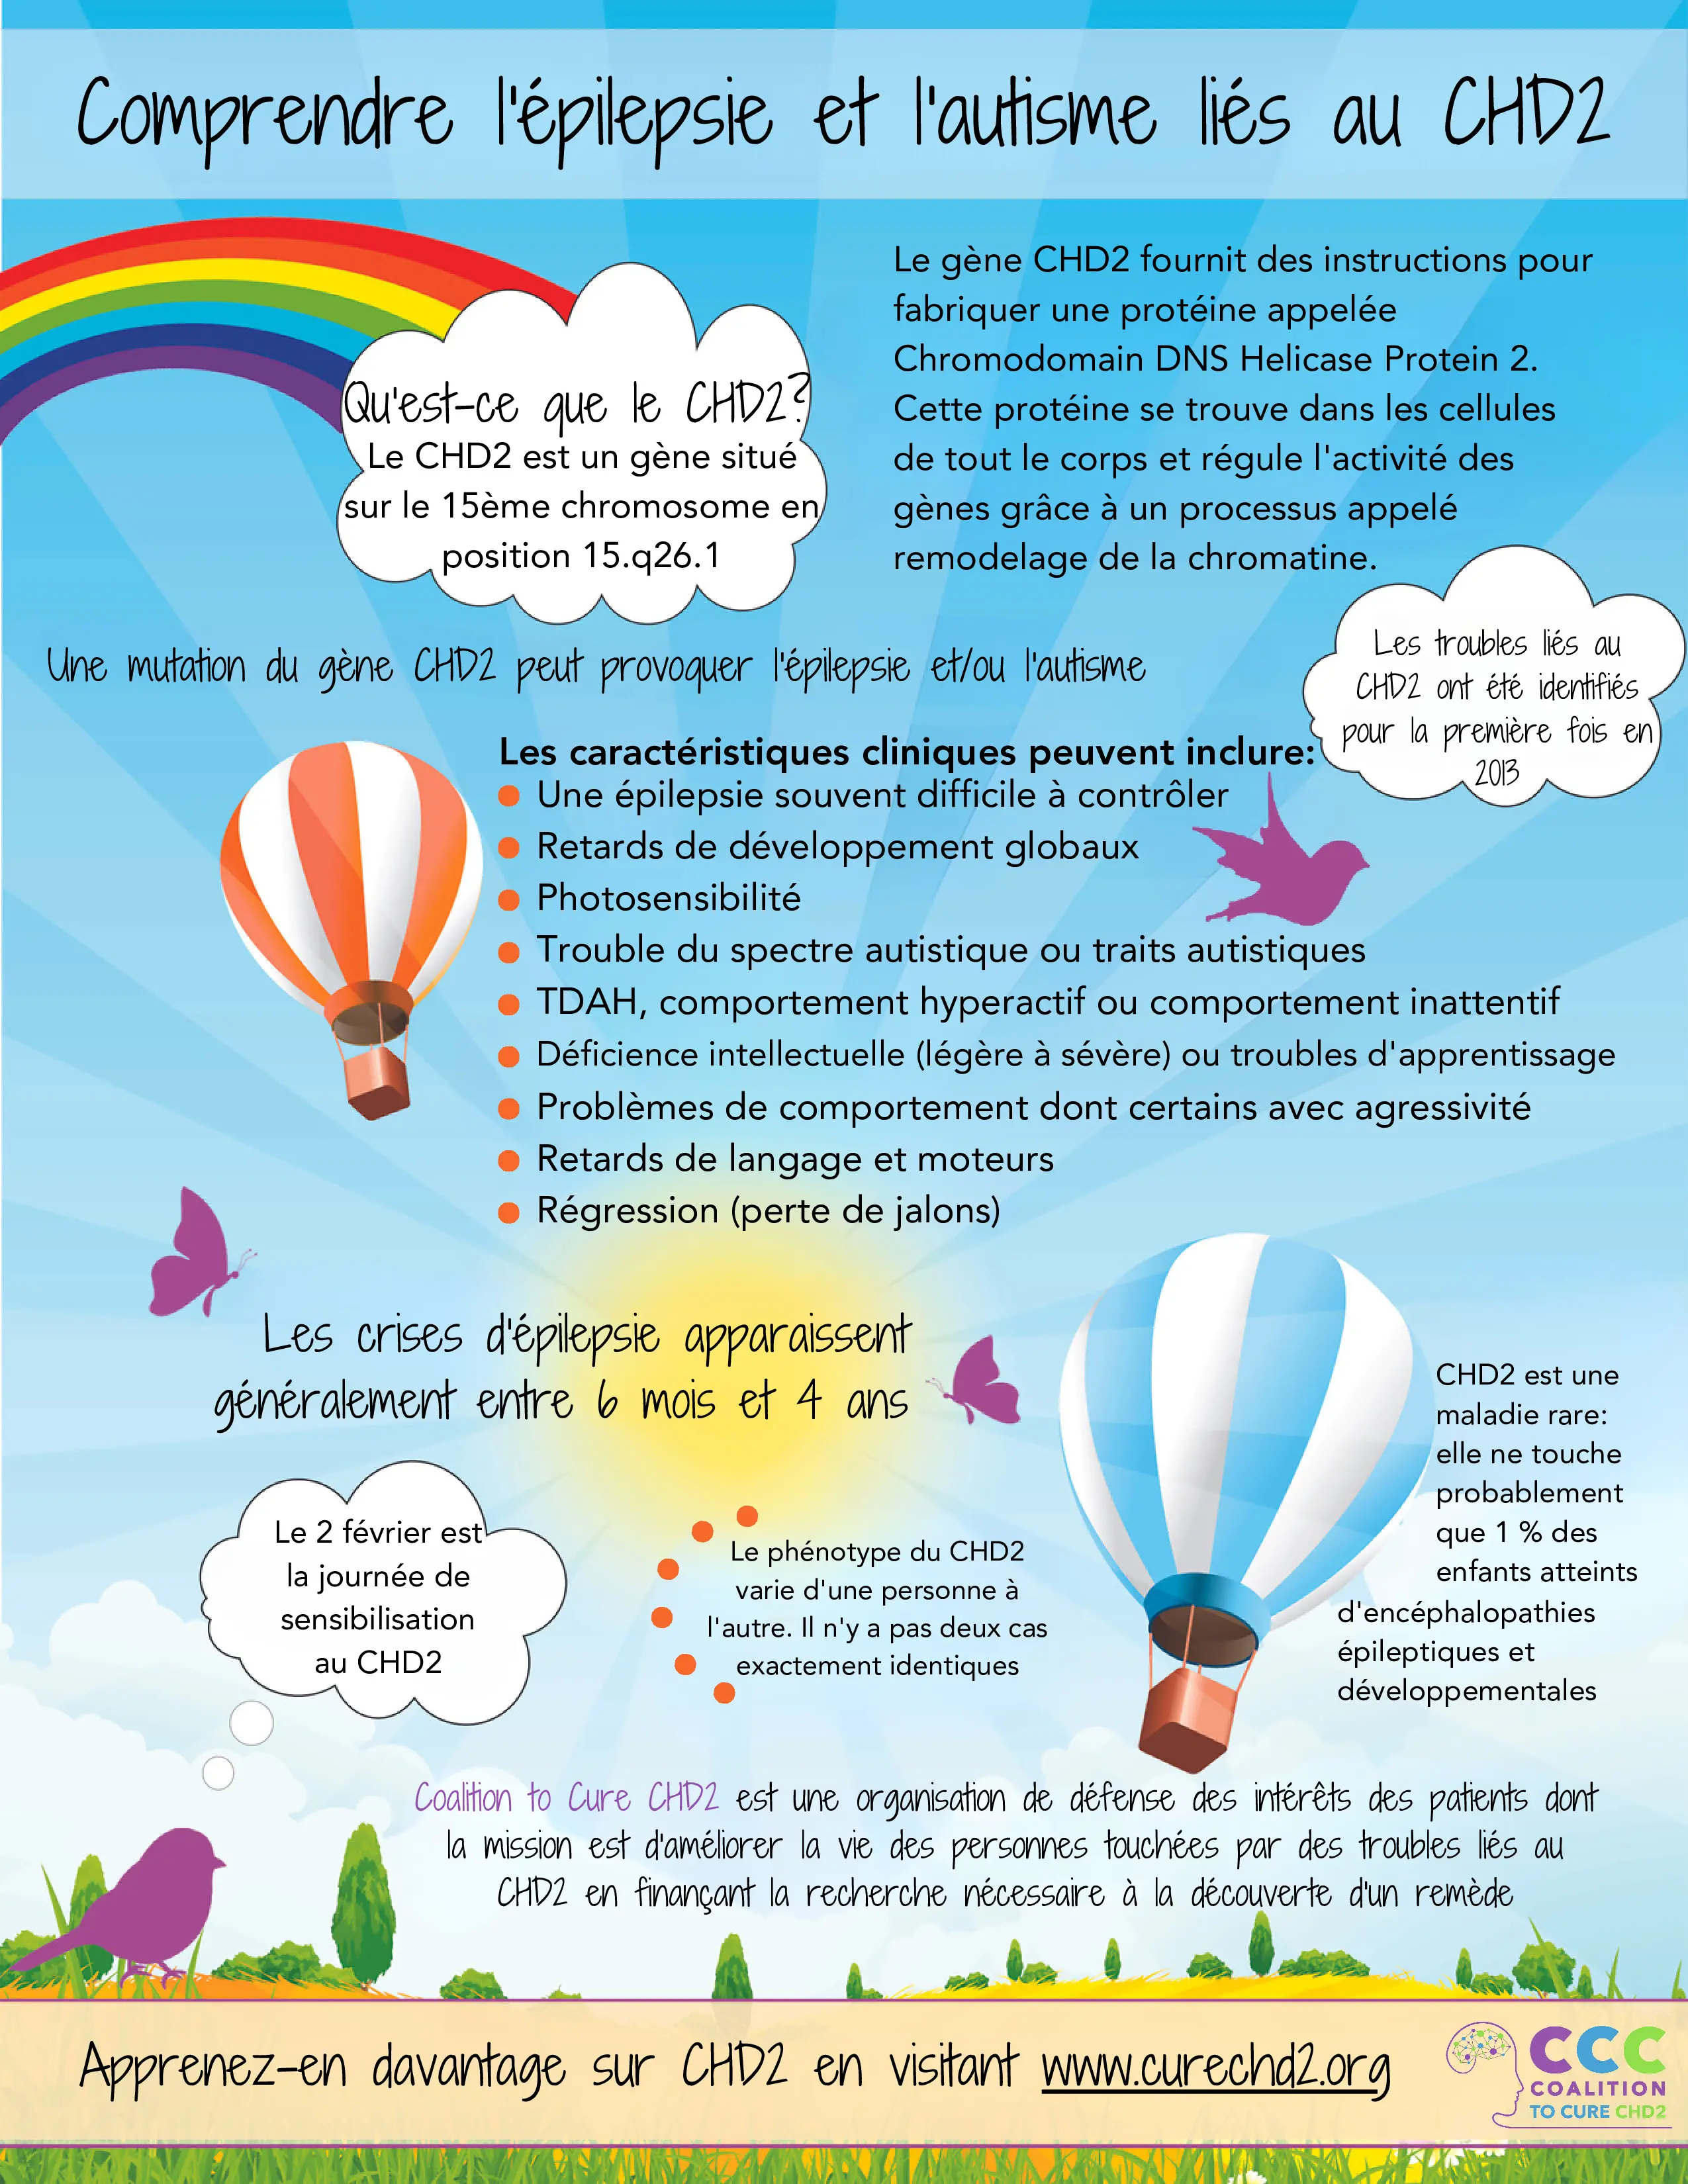 infographic about chd2 French